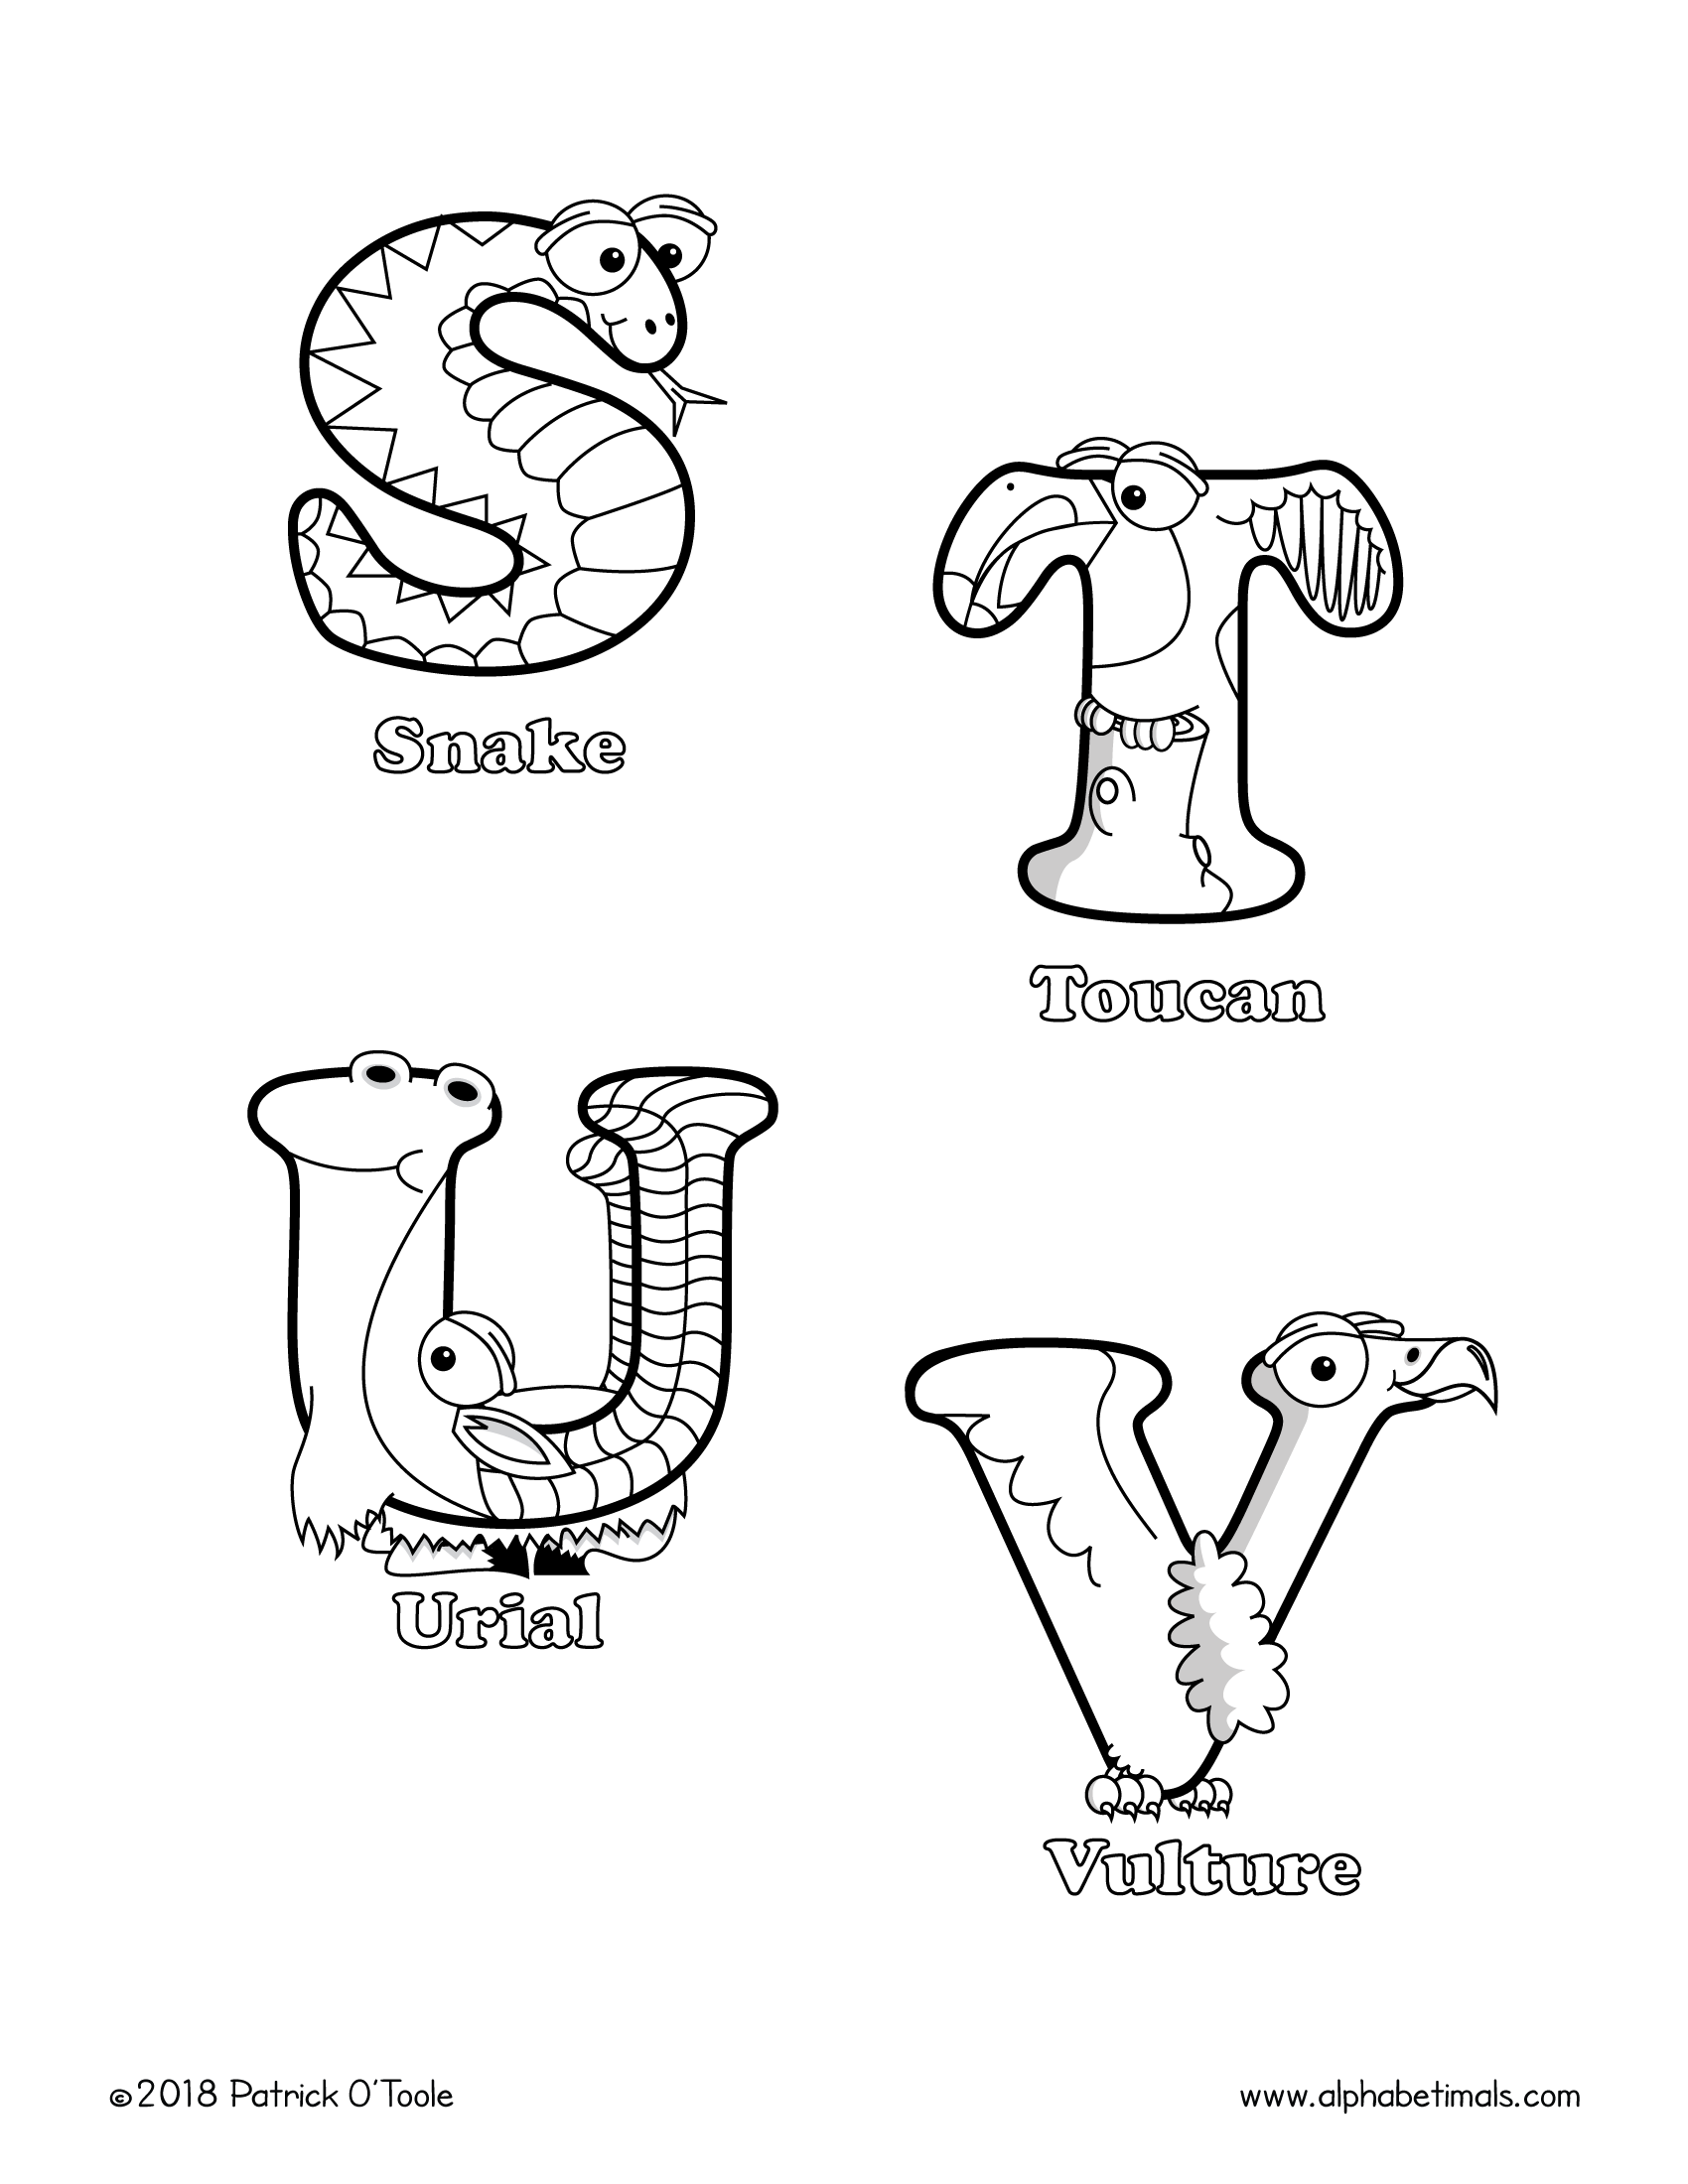 Printable Coloring Pages: Uppercase Letters & Animals - Alphabetimals Animal  Dictionary